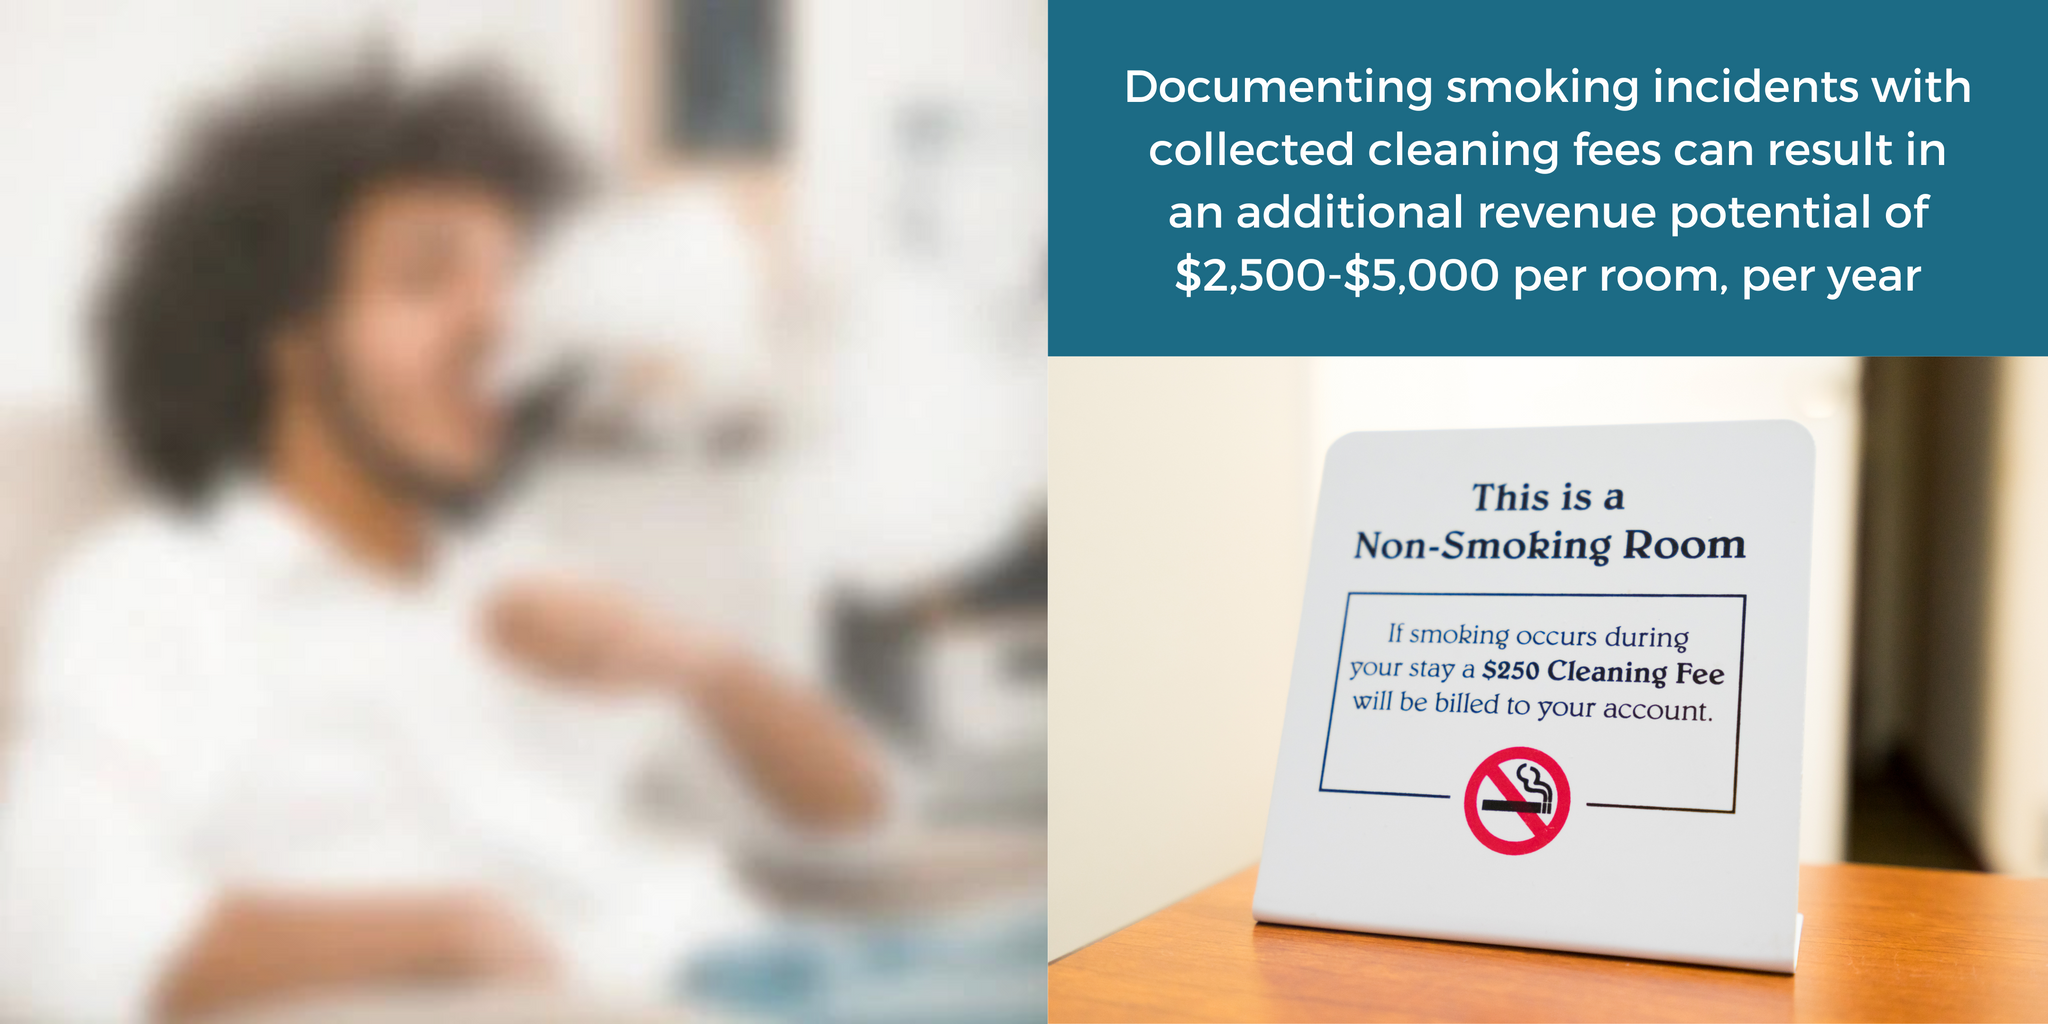 Smoking incidents can result in a additional revenue potential of $2,500-$5,000 per room, per year